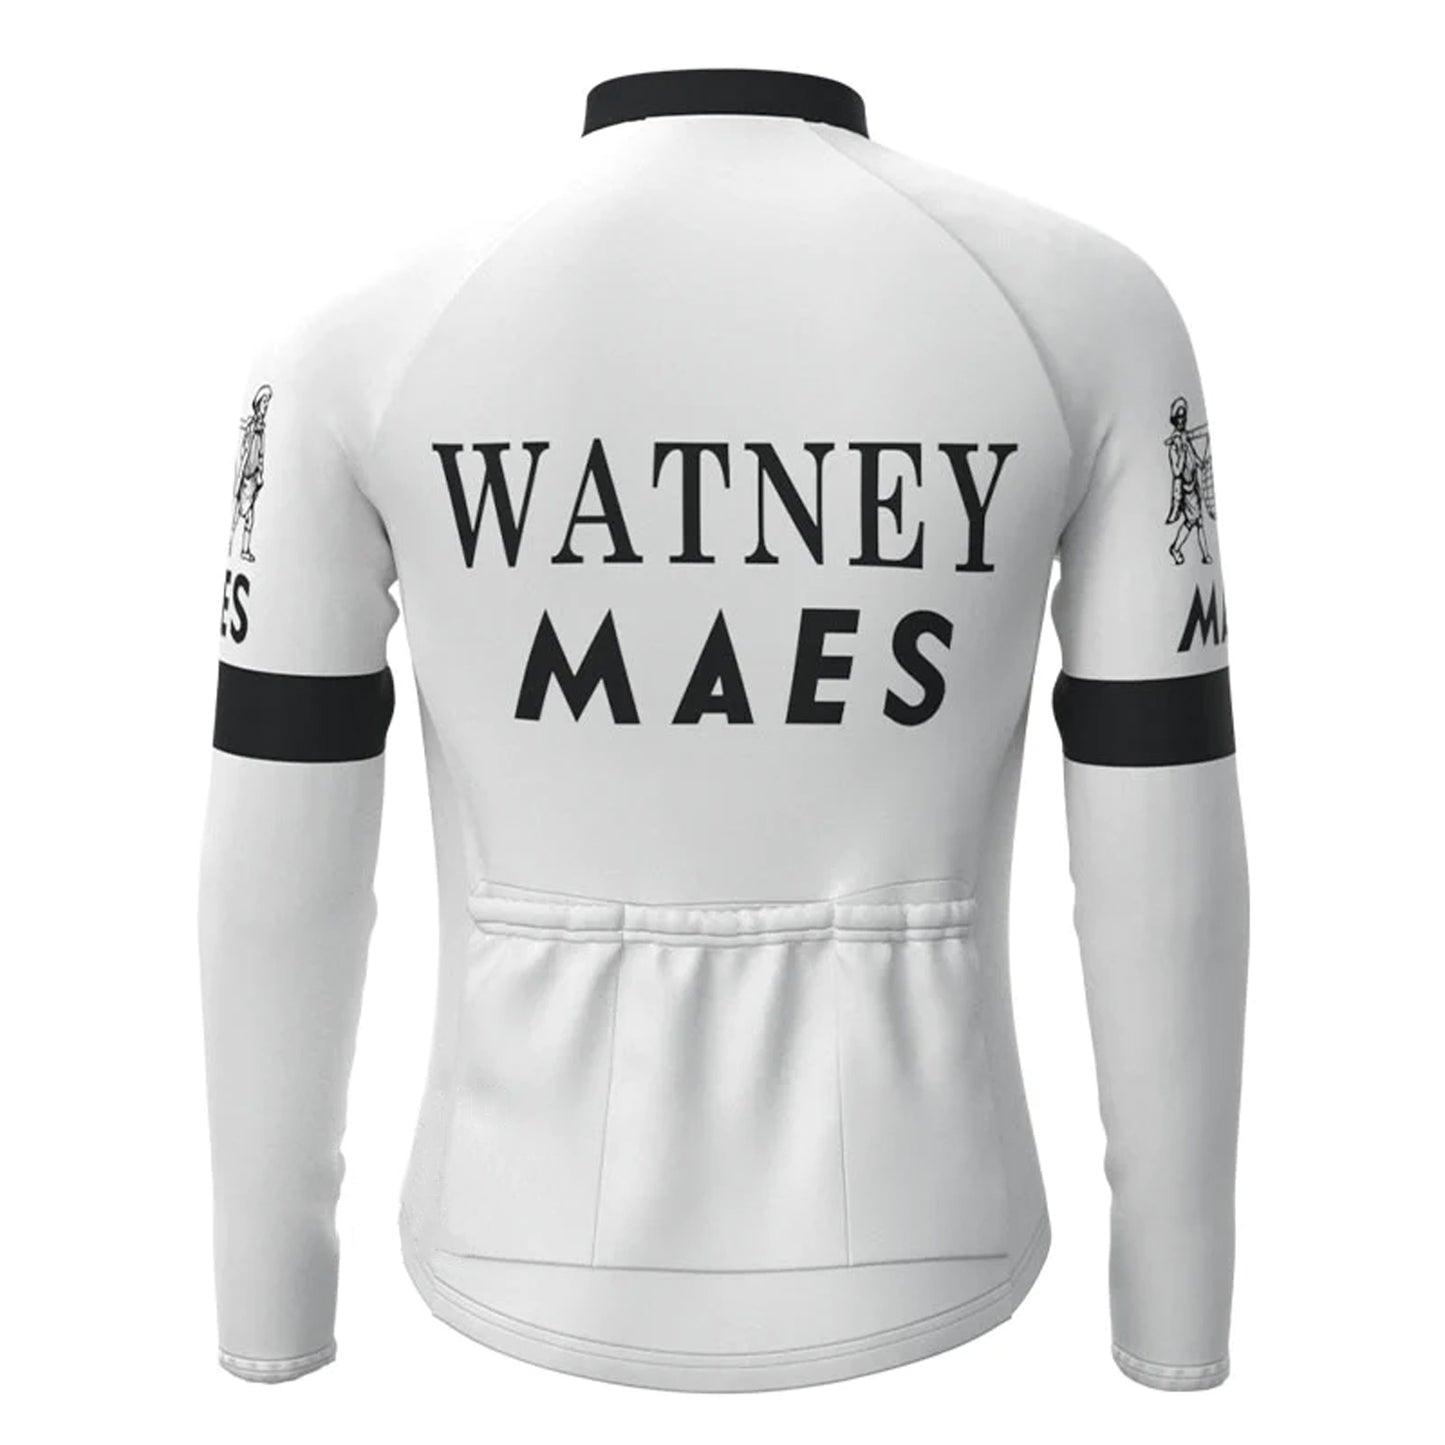 Watney Maes White Vintage Long Sleeve Cycling Jersey Top